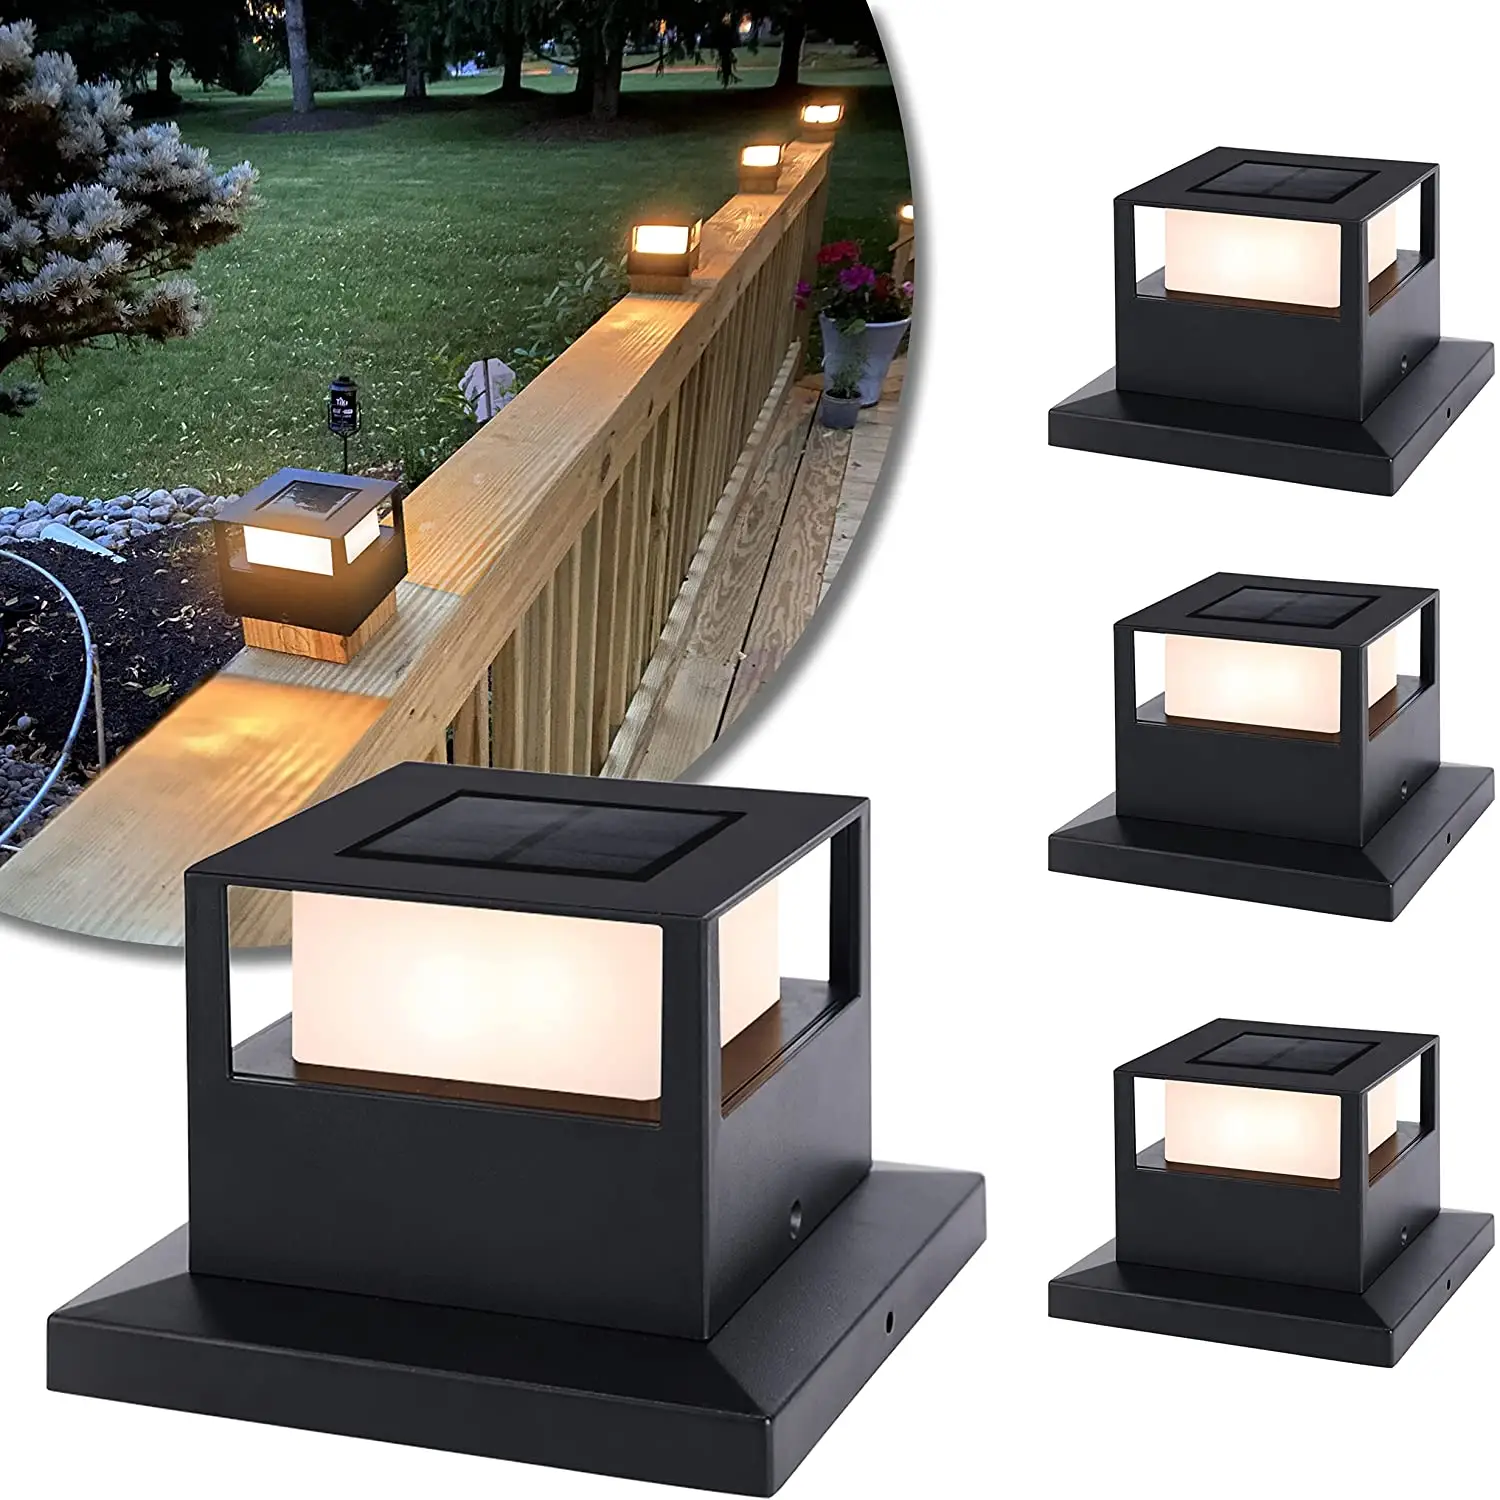 Outdoor Garden Waterproof Light Decorative Solar Powered Fence Post Cap Lights With Smd Leds Solar Post Lights For Wooden Posts